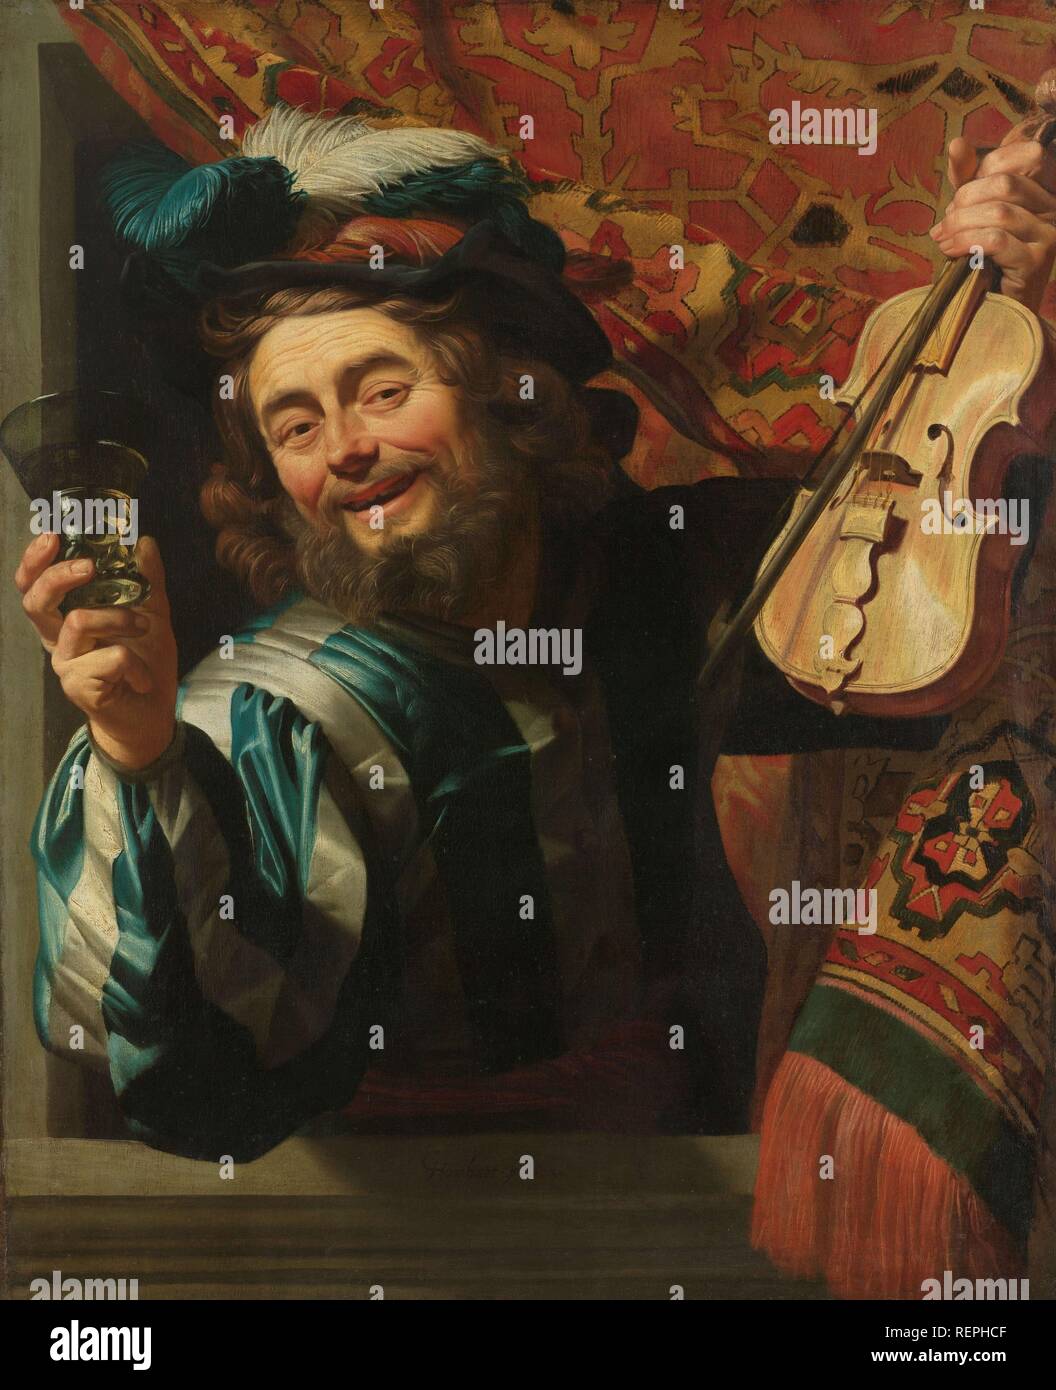 The Merry Fiddler. Merry Violinist with Wineglass. Dating: 1623. Measurements: support: h 107.2 cm × w 88.3 cm. Museum: Rijksmuseum, Amsterdam. Author: GERARD VAN HONTHORST. Stock Photo